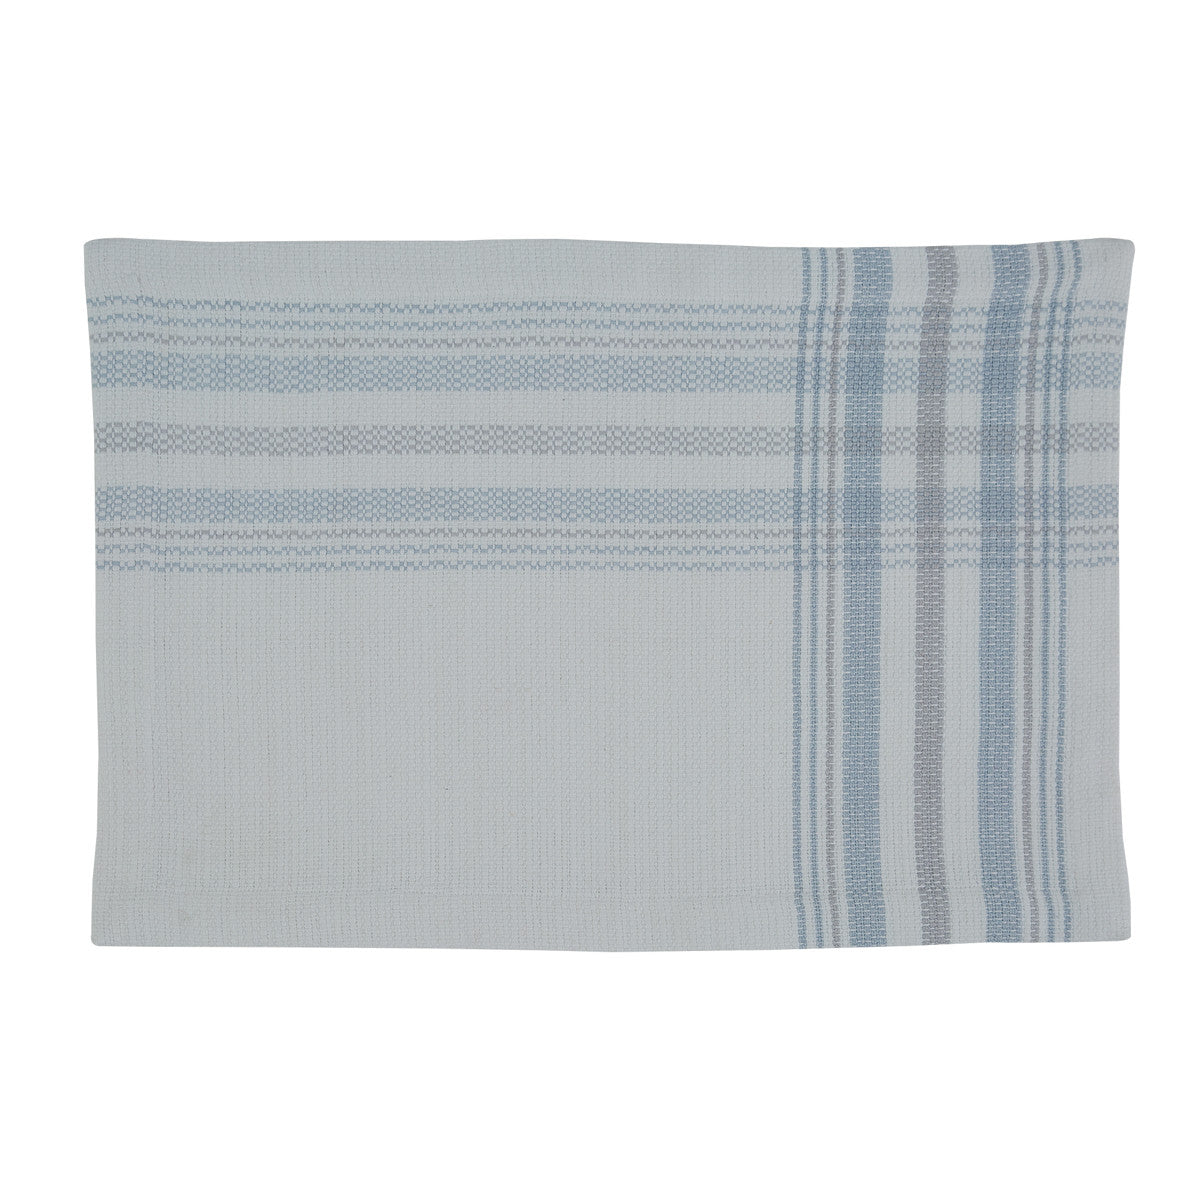 French Chic Plaid Placemat - Set Of 6 Park Designs